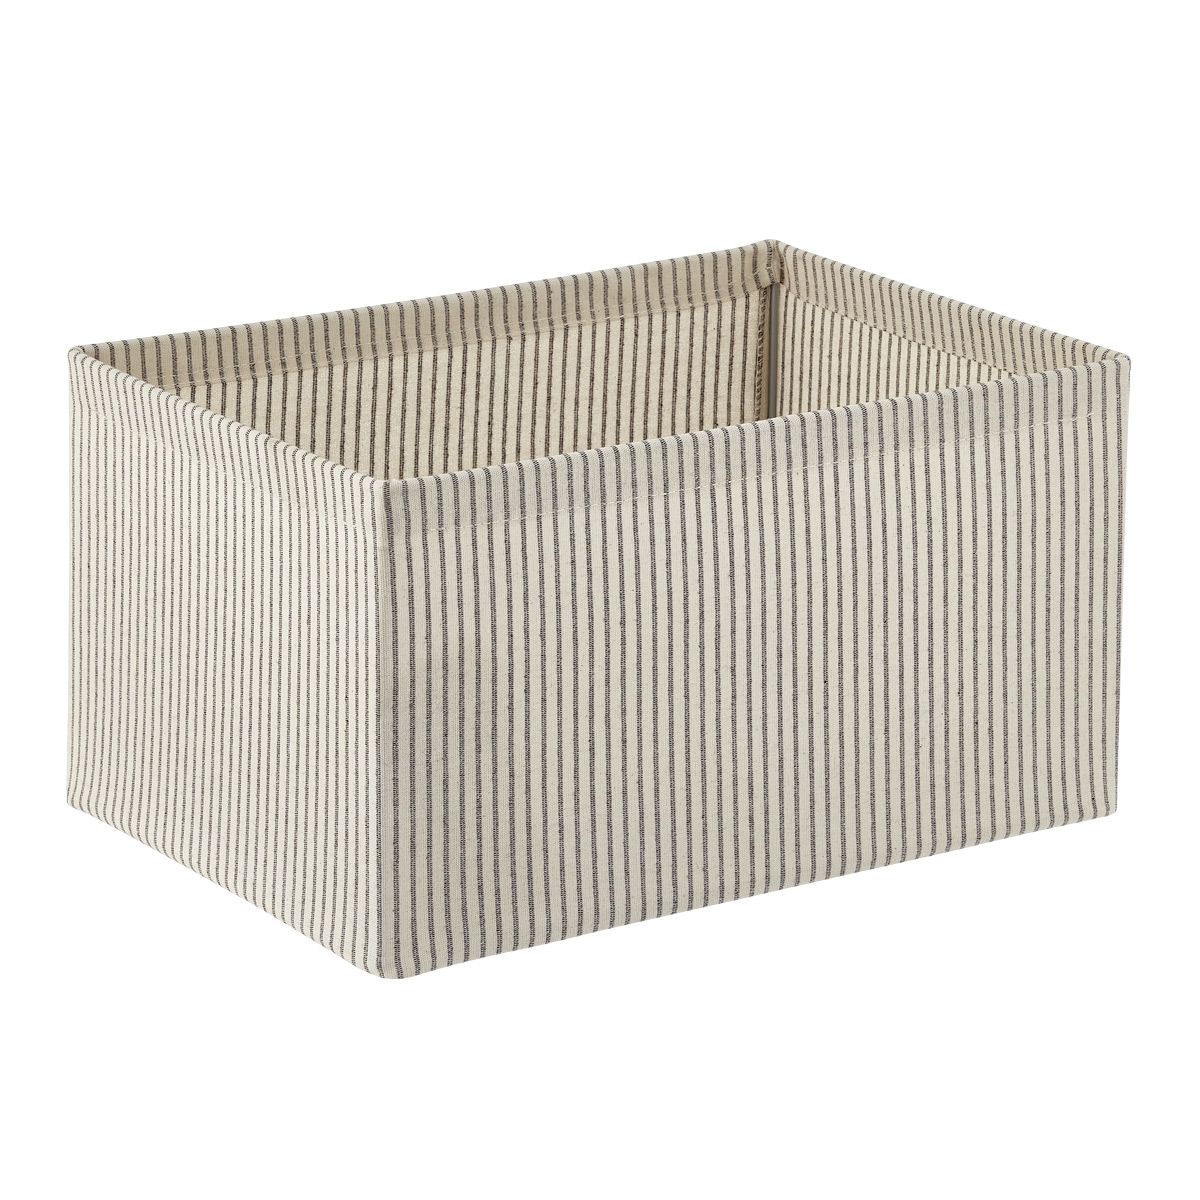 Straight-Sided Open Storage Bin | The Container Store